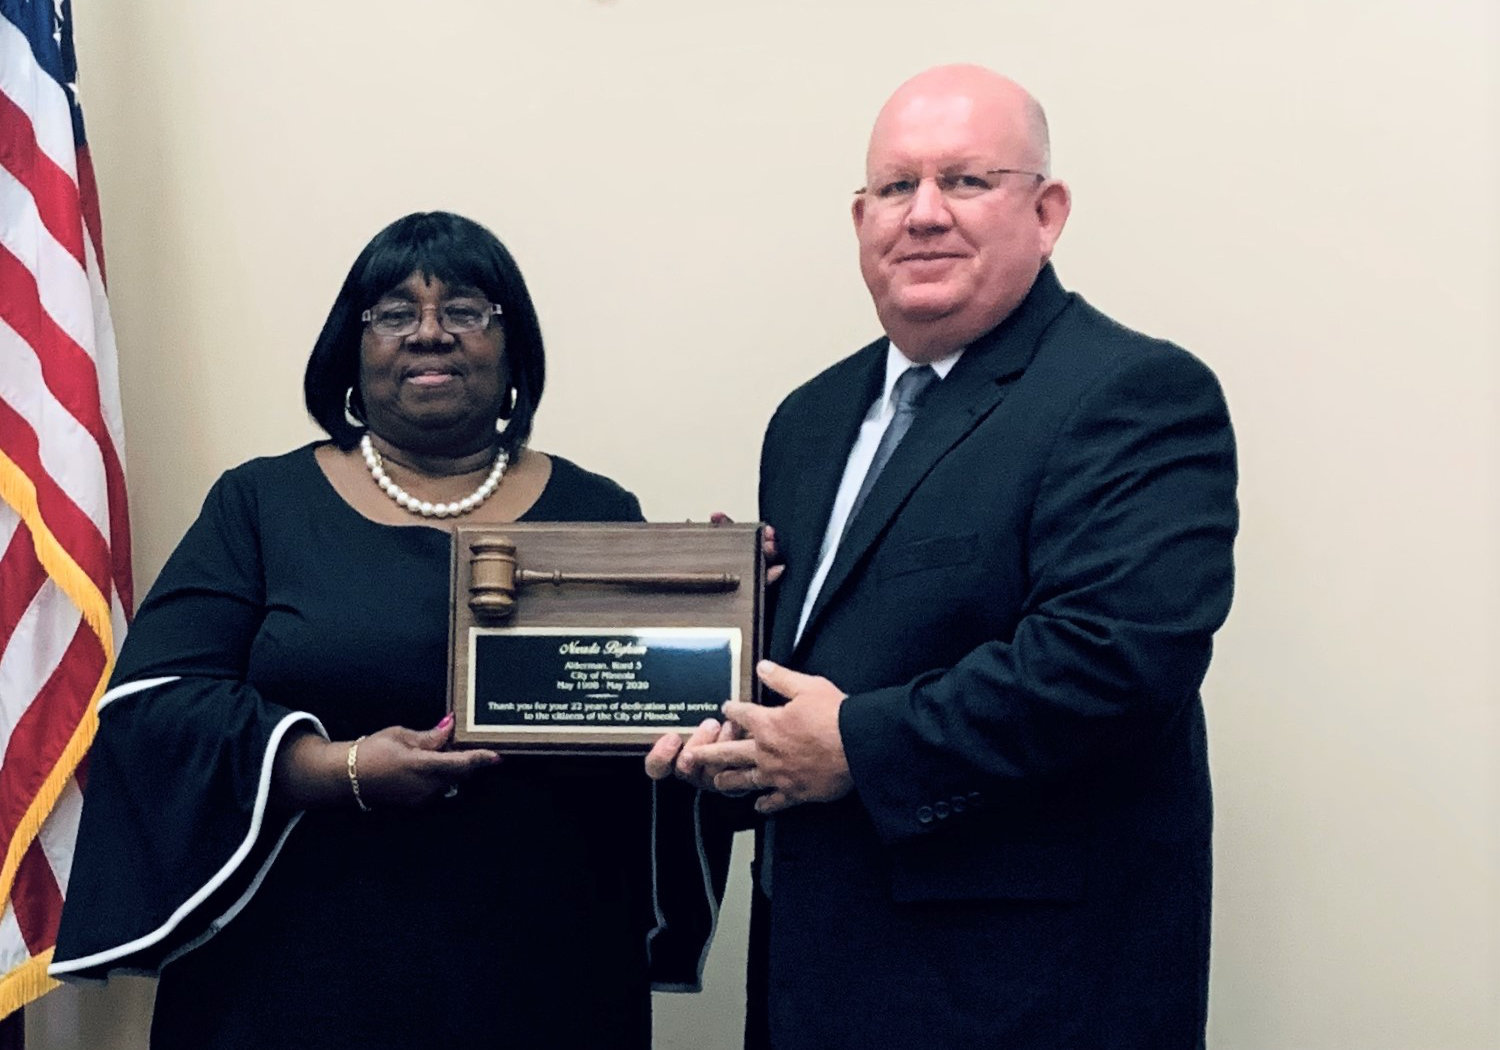 Mayor Kevin White presents Novada Bigham with a gavel in recognition of her 22 years of service to the Mineola City Council.